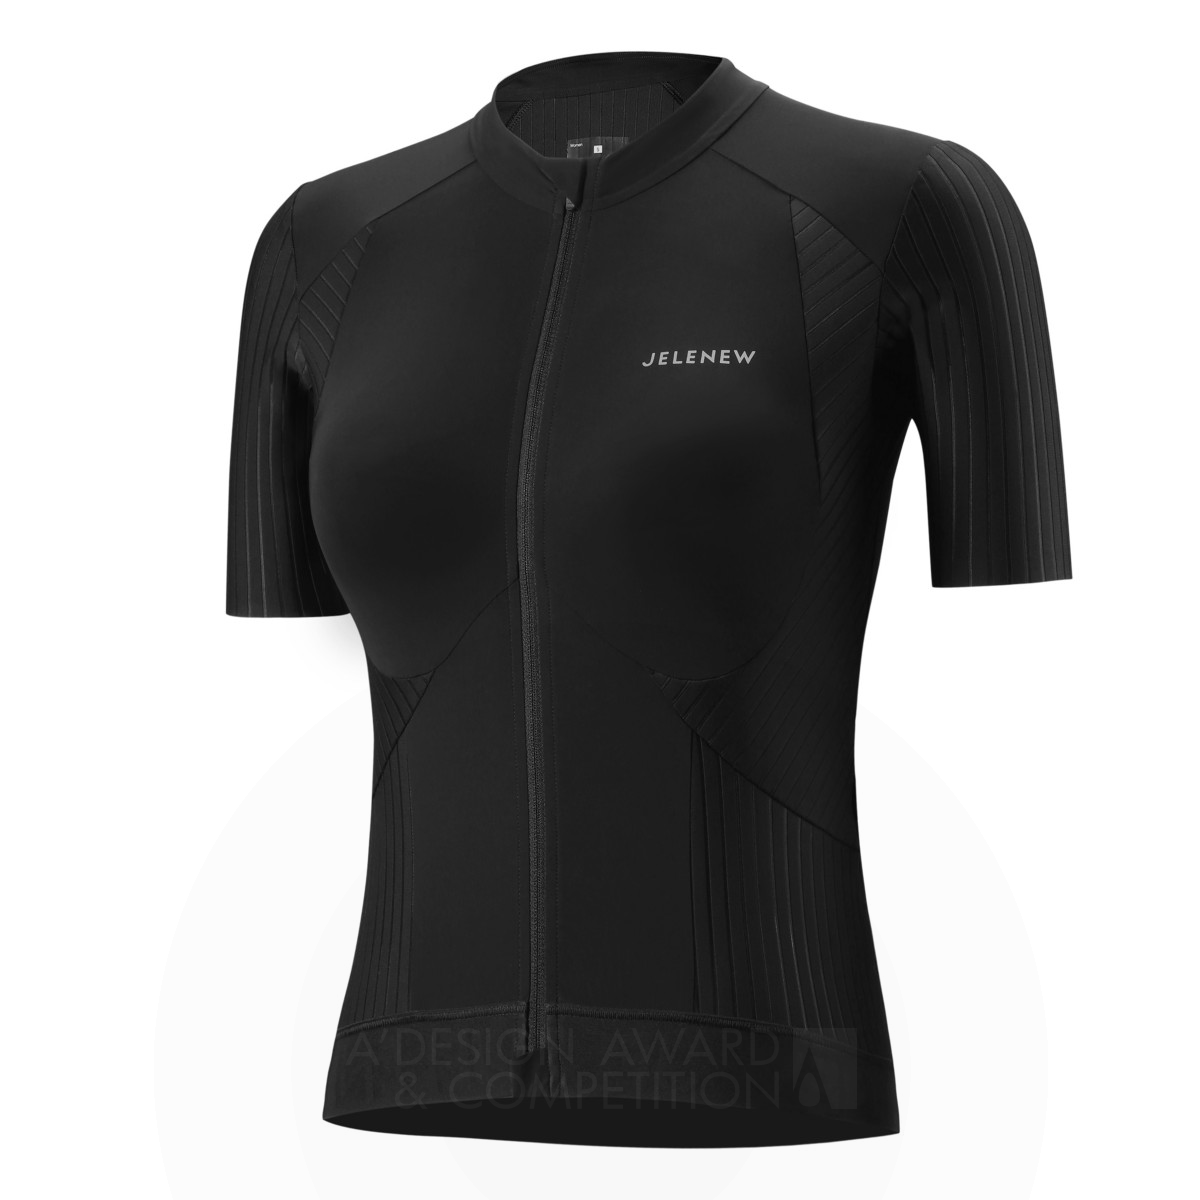 Jelenew Incorporated wins Silver at the prestigious A' Sporting Goods, Fitness and Recreation Equipment Design Award with Jelenew Short Sleeve Jersey.